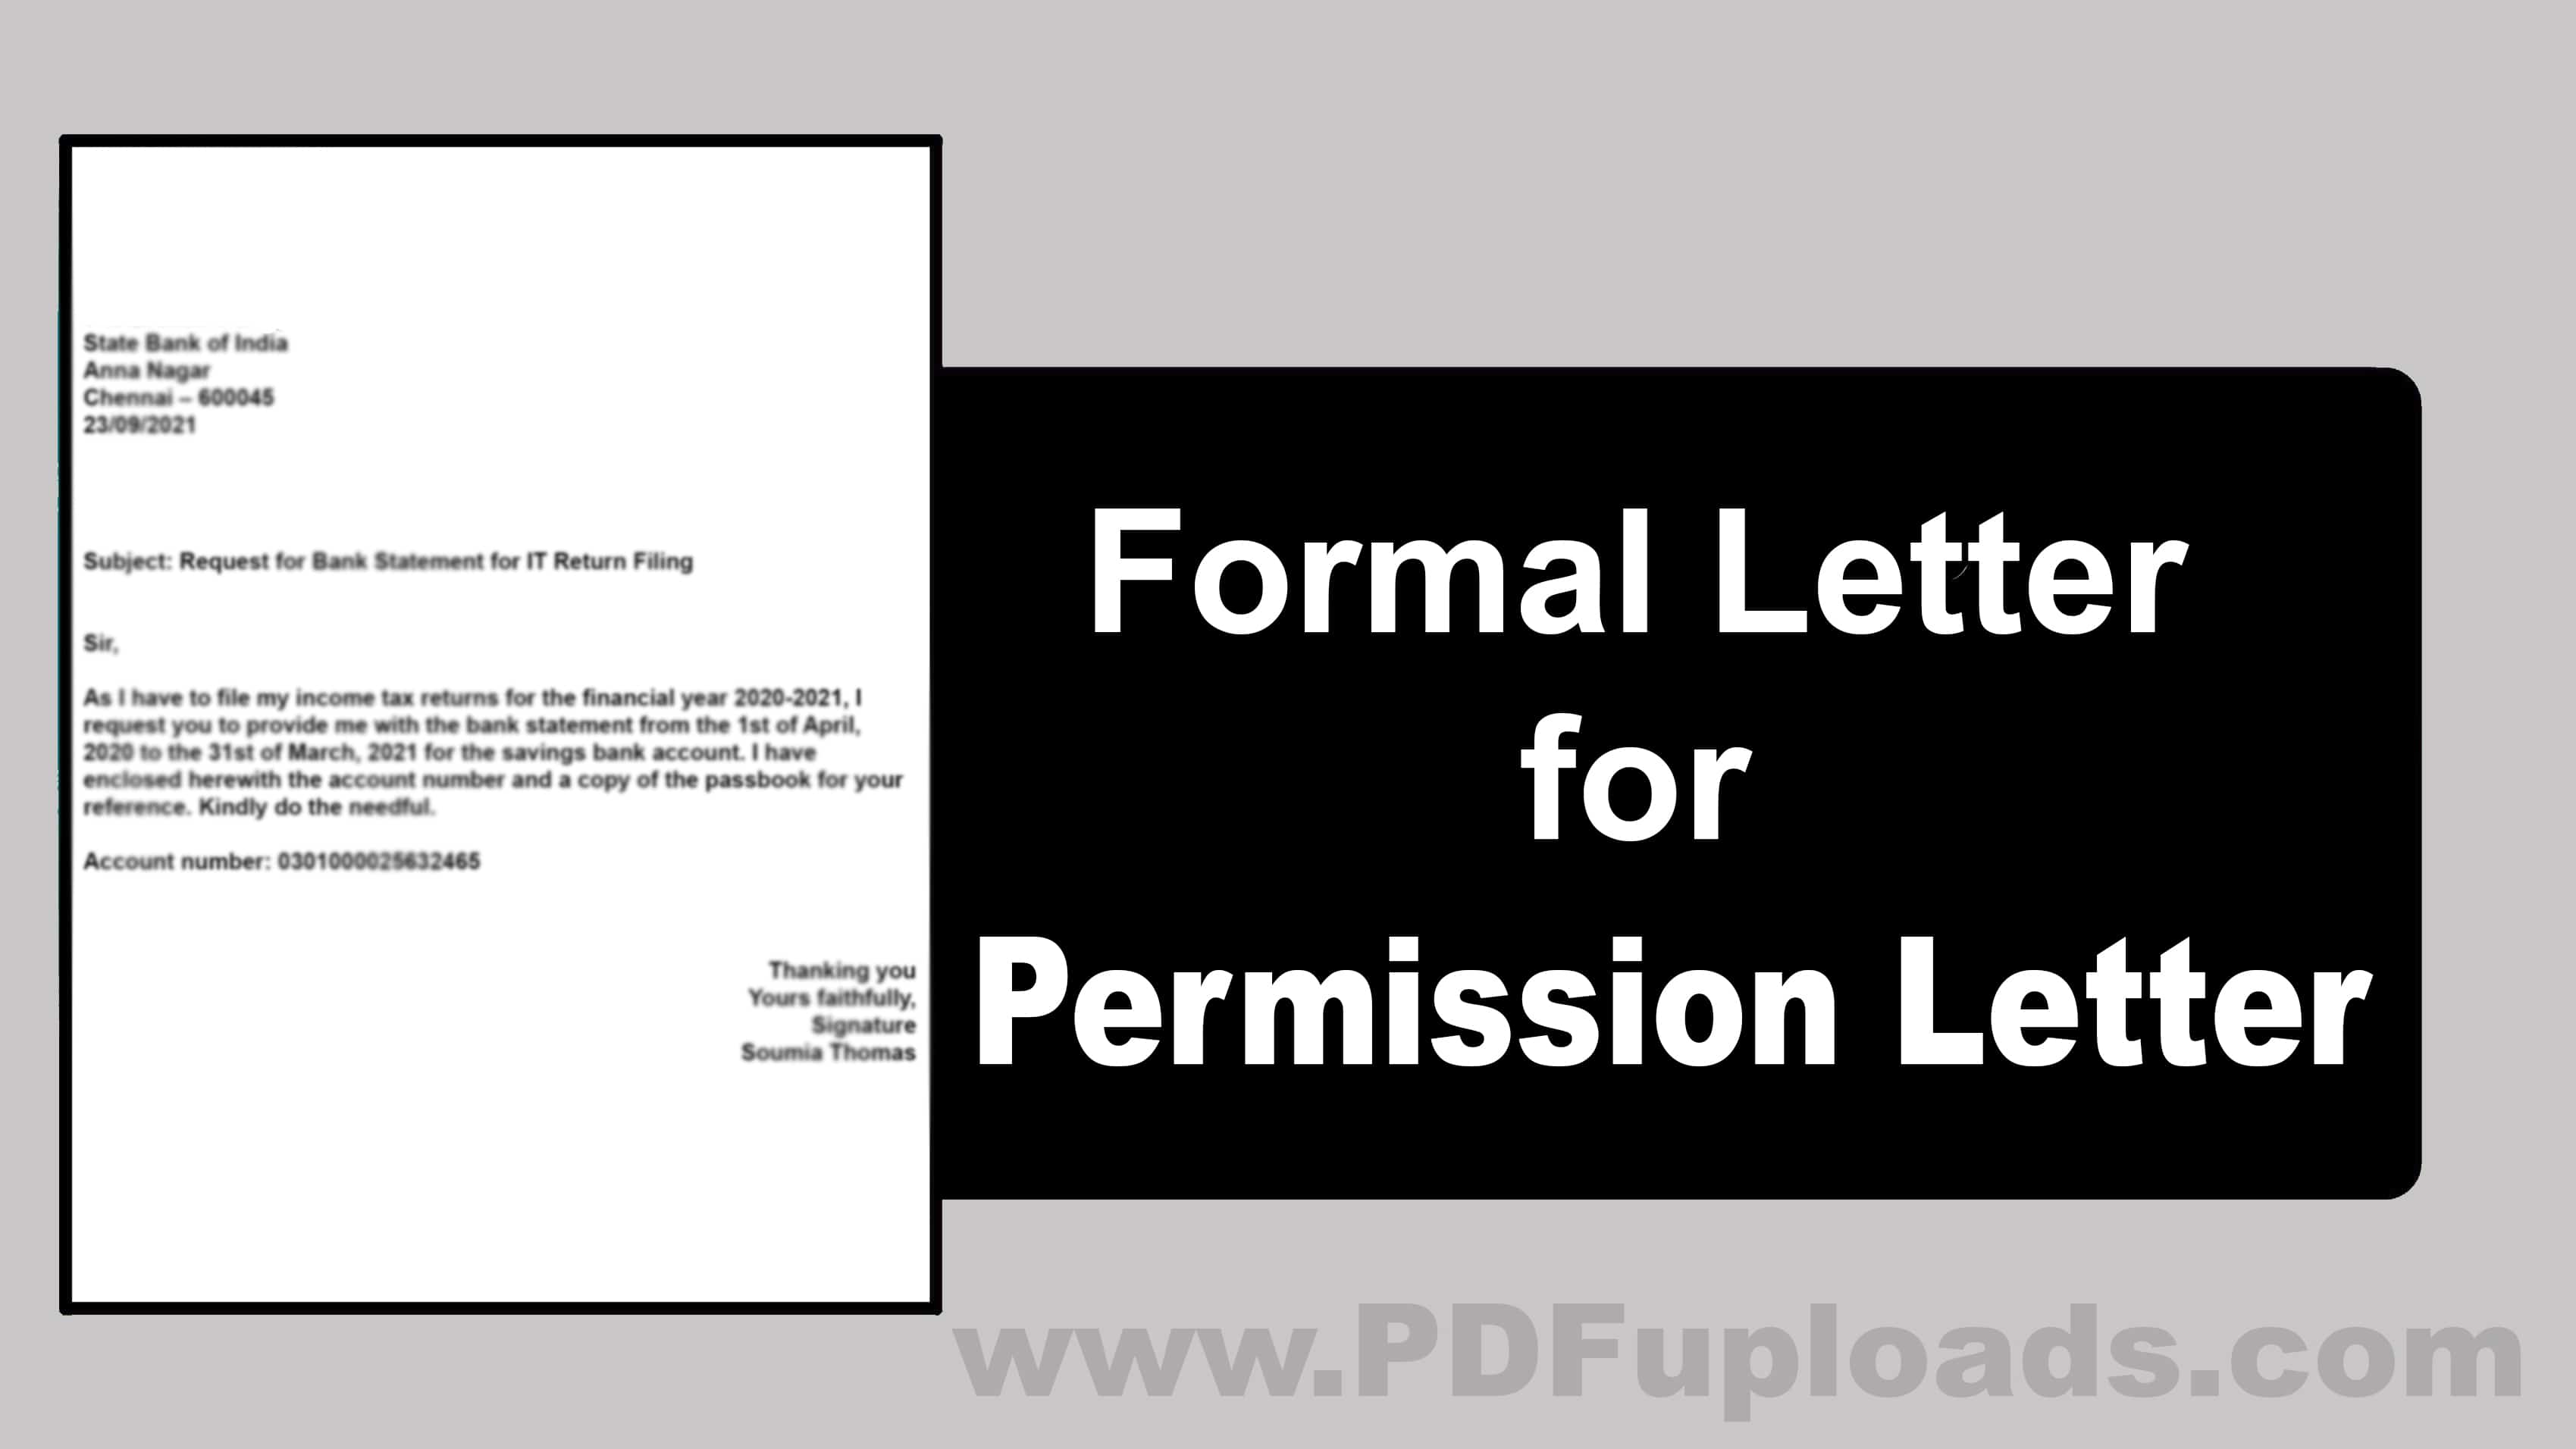 Permission Letter Format and Samples